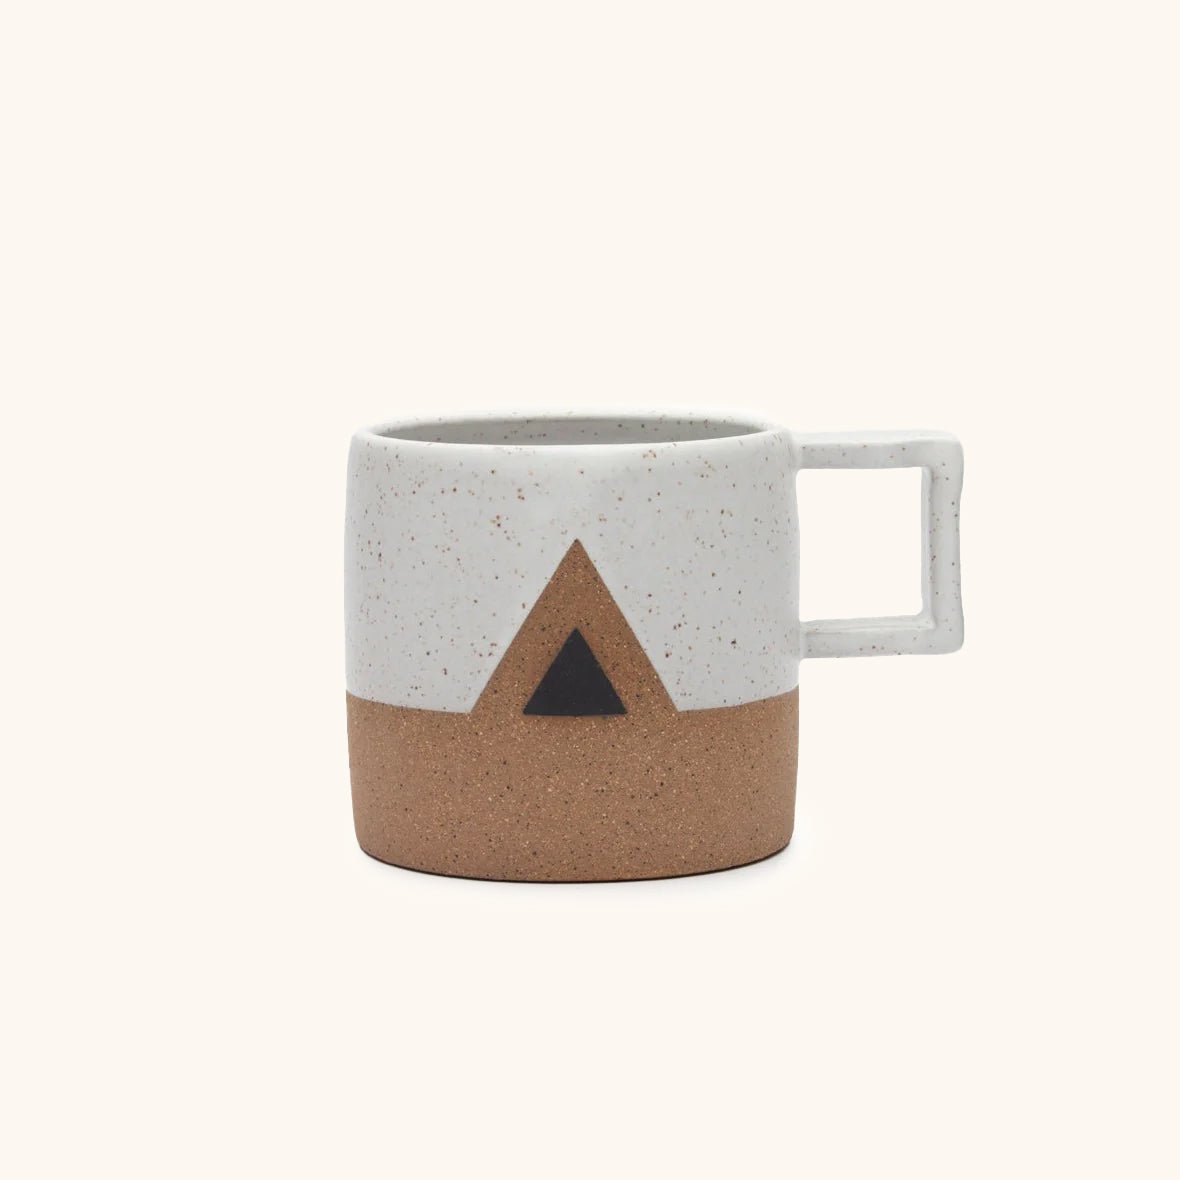 Handle Mug with white satin glaze and a black triangle. Made in Hood River, Oregon by Wolf Ceramics.